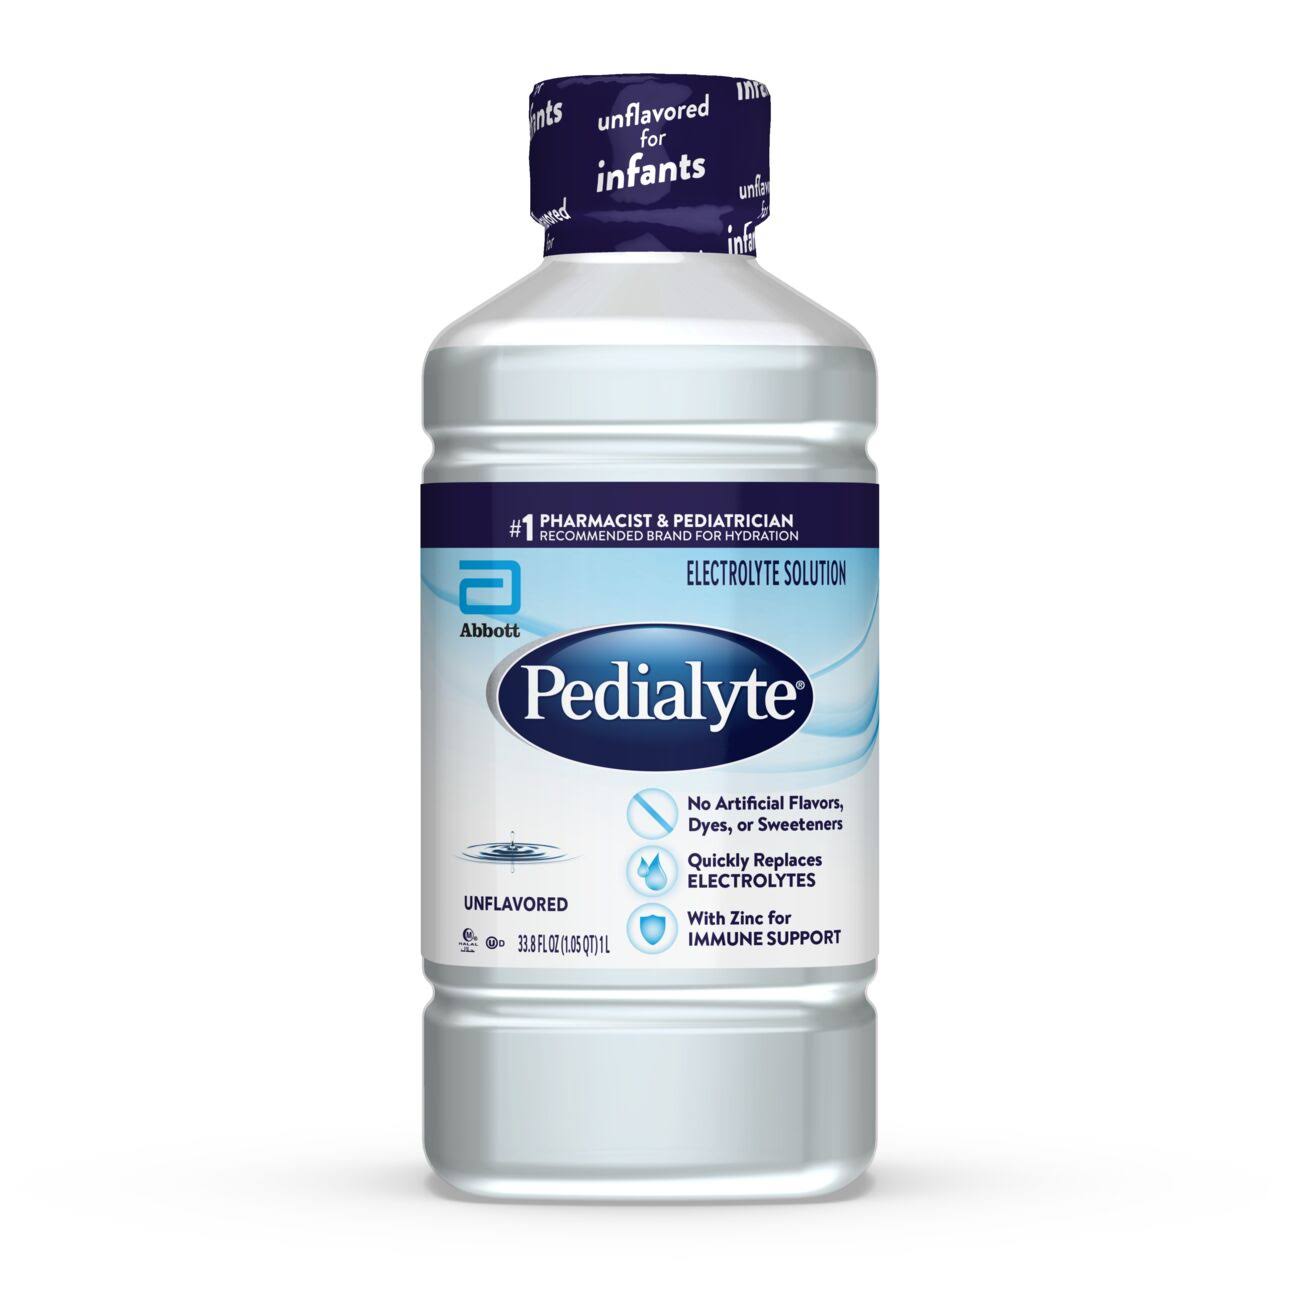 Pedialyte Oral Electrolyte Maintenance Solution - Unflavored, 1L